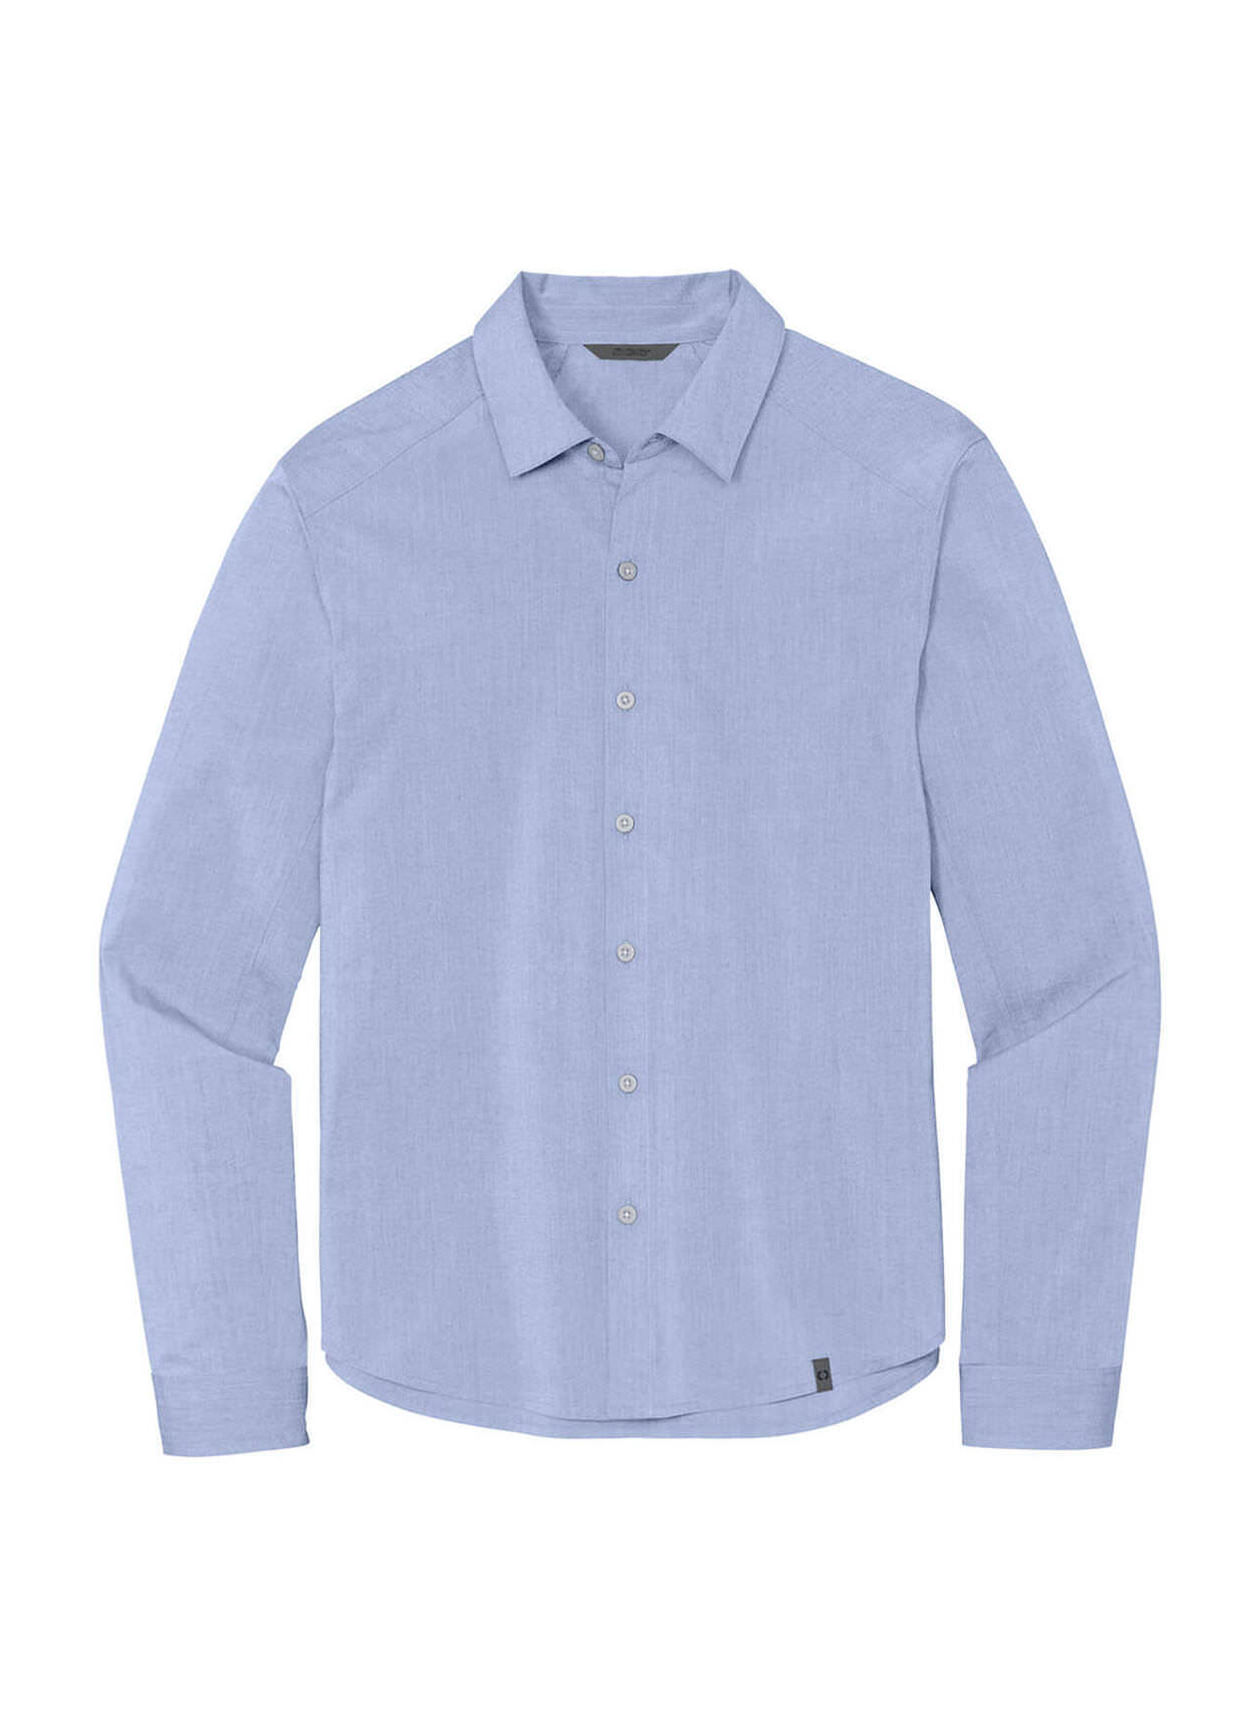 Printed OGIO Men's Metal Blue Heather Commuter Woven Shirt | Company ...